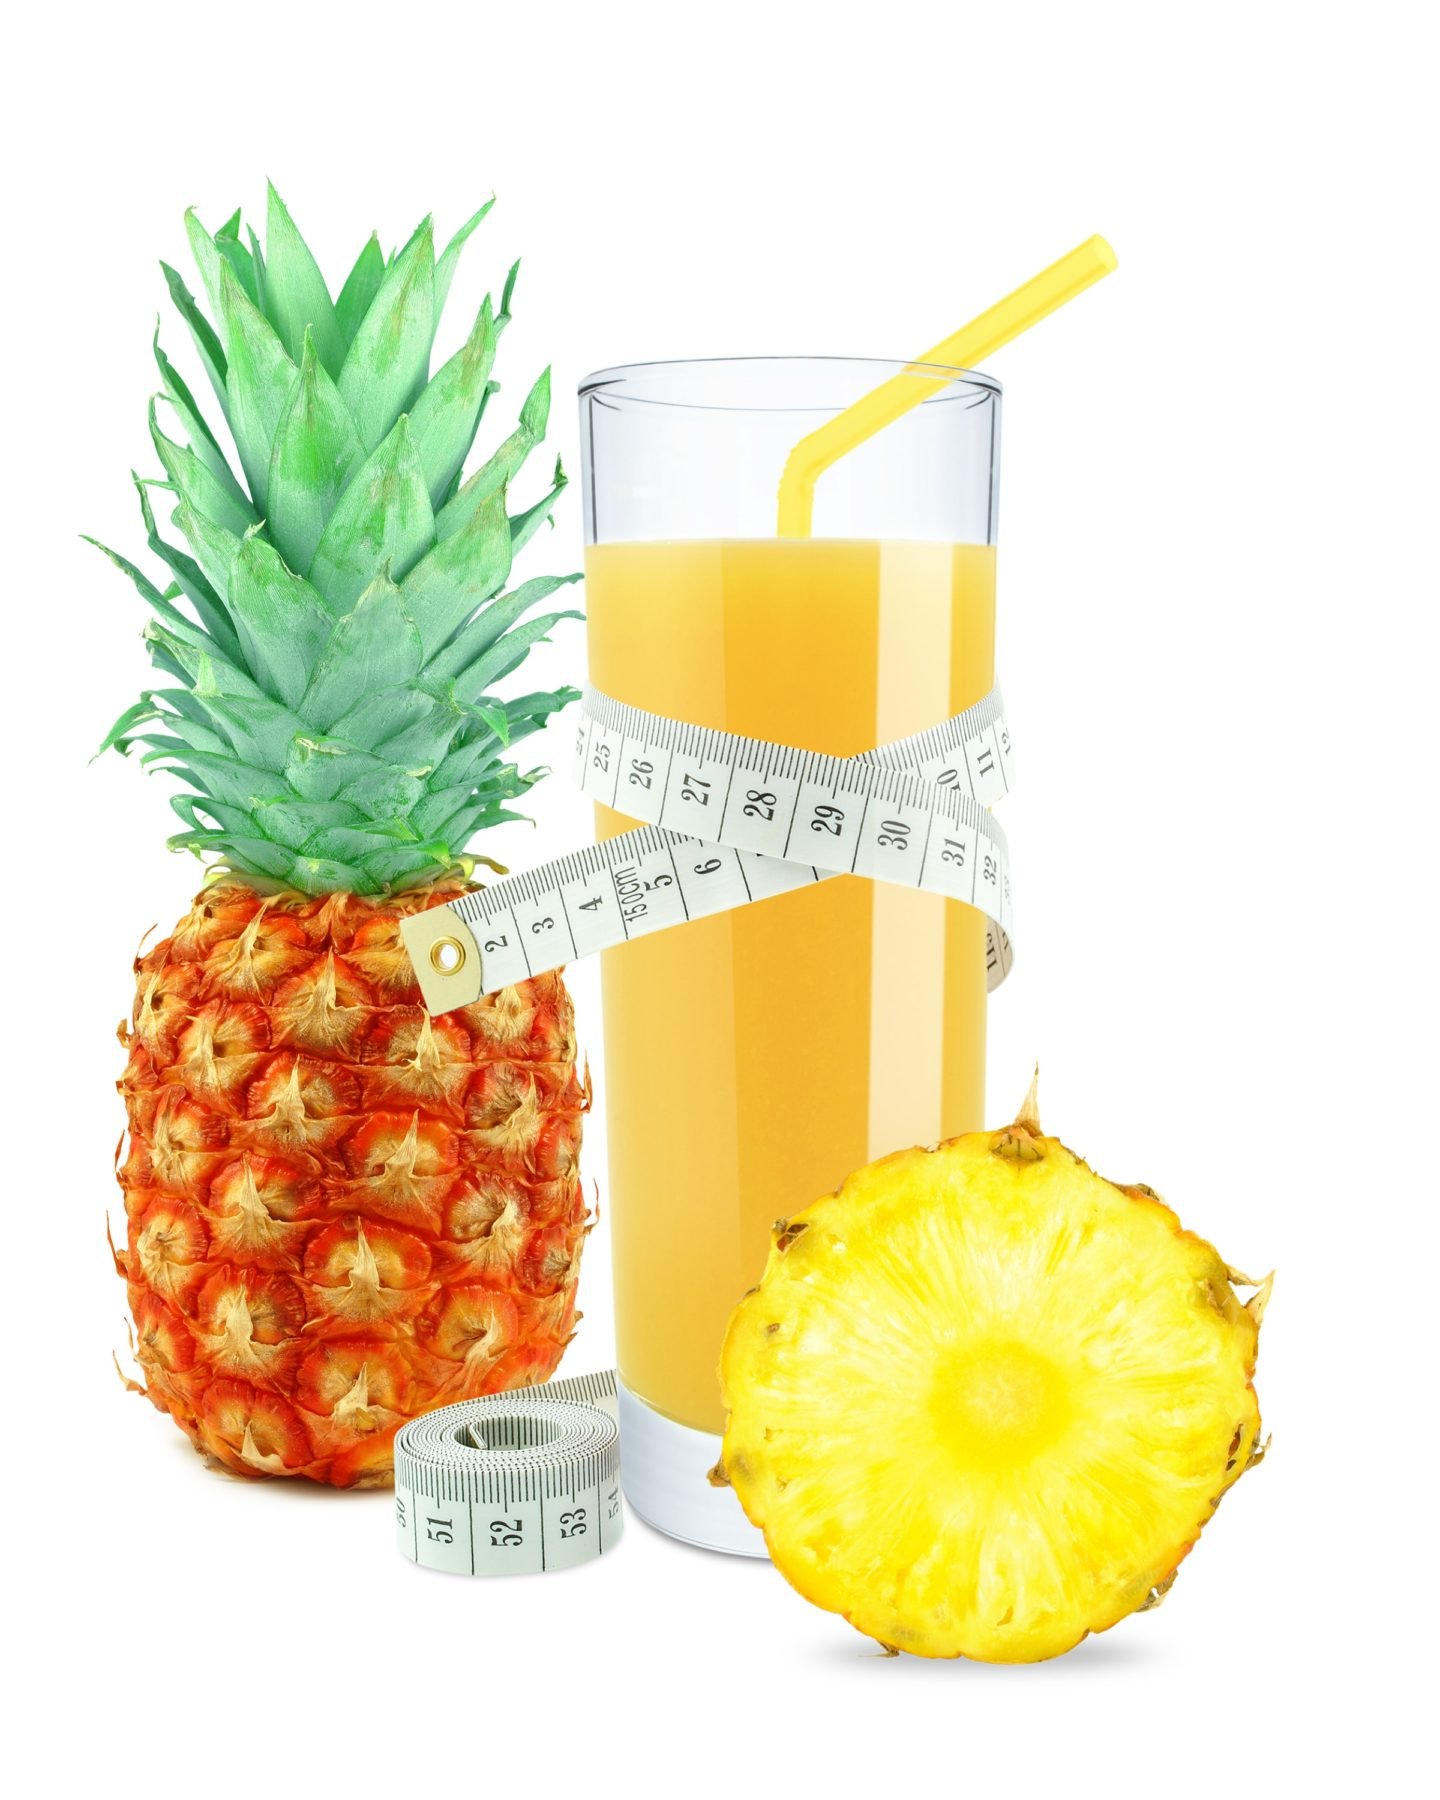 Pineapple Juice With Measuring Tape